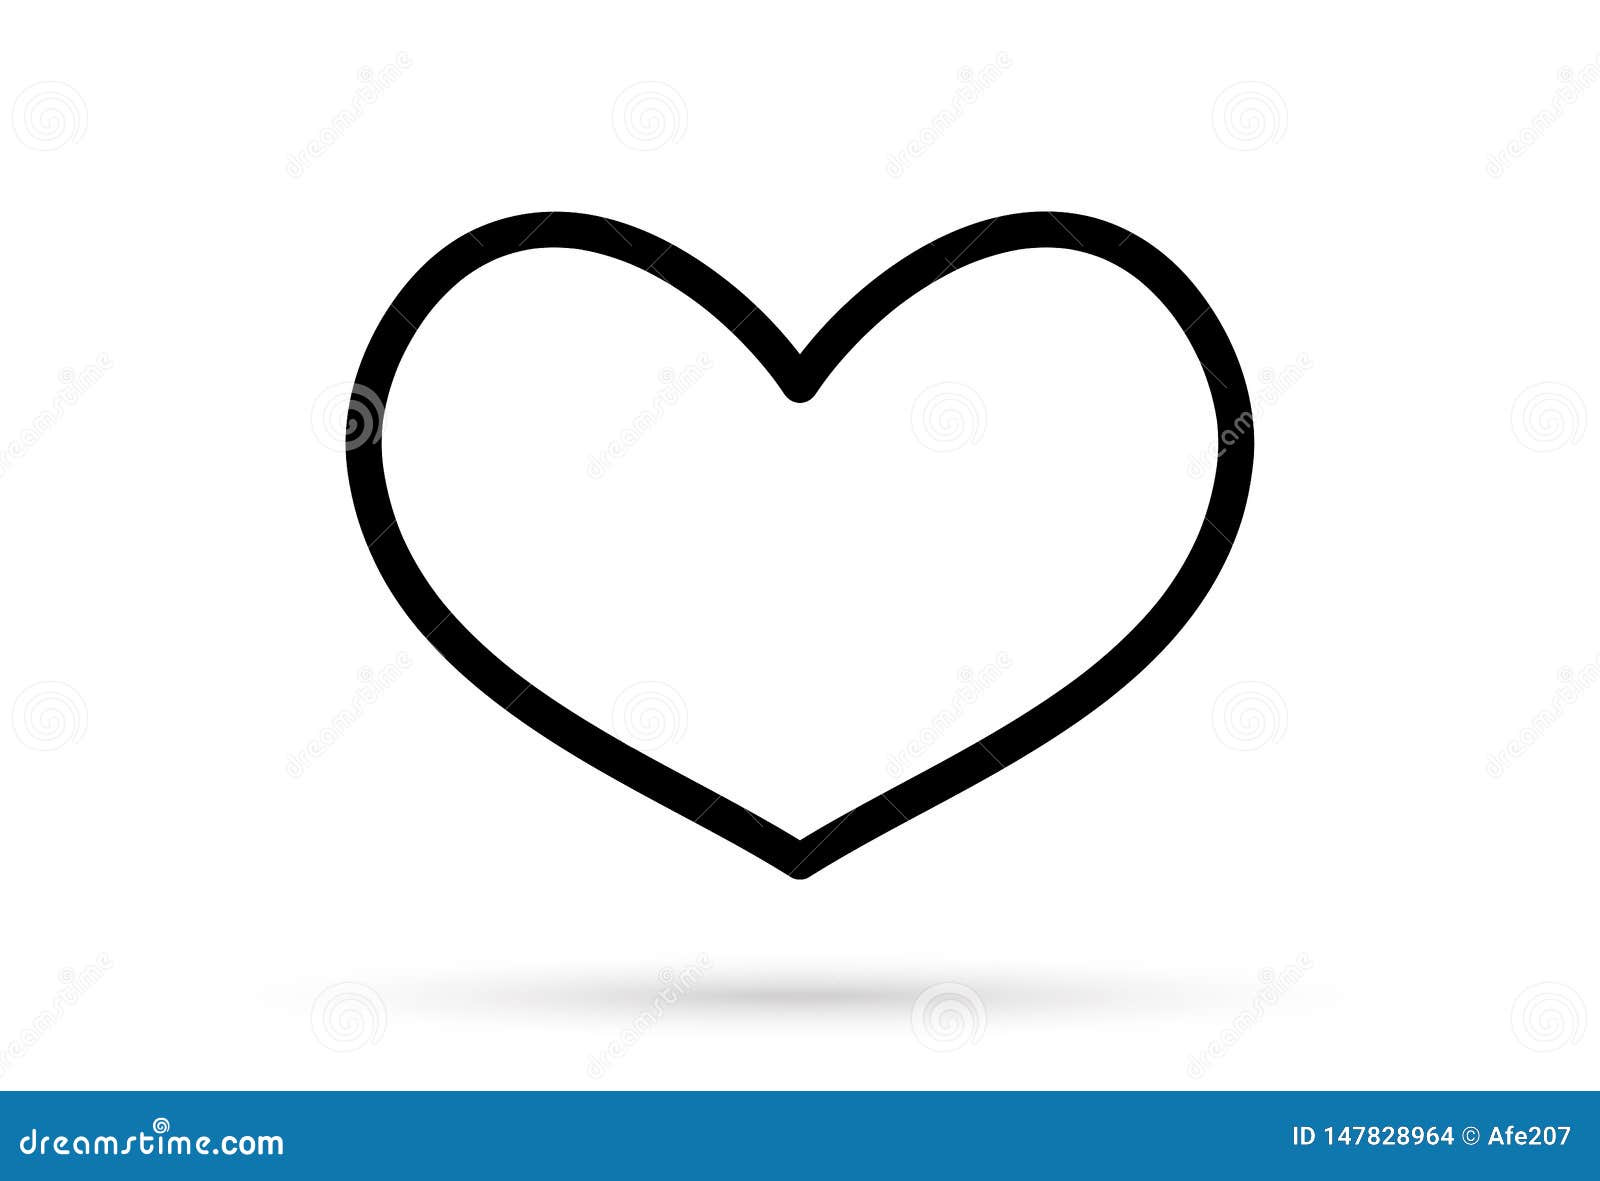 Popular Heart Drawing Love Valentine Sign Symbol Isolated Stock Vector Illustration Of Grunge Graphic 147828964